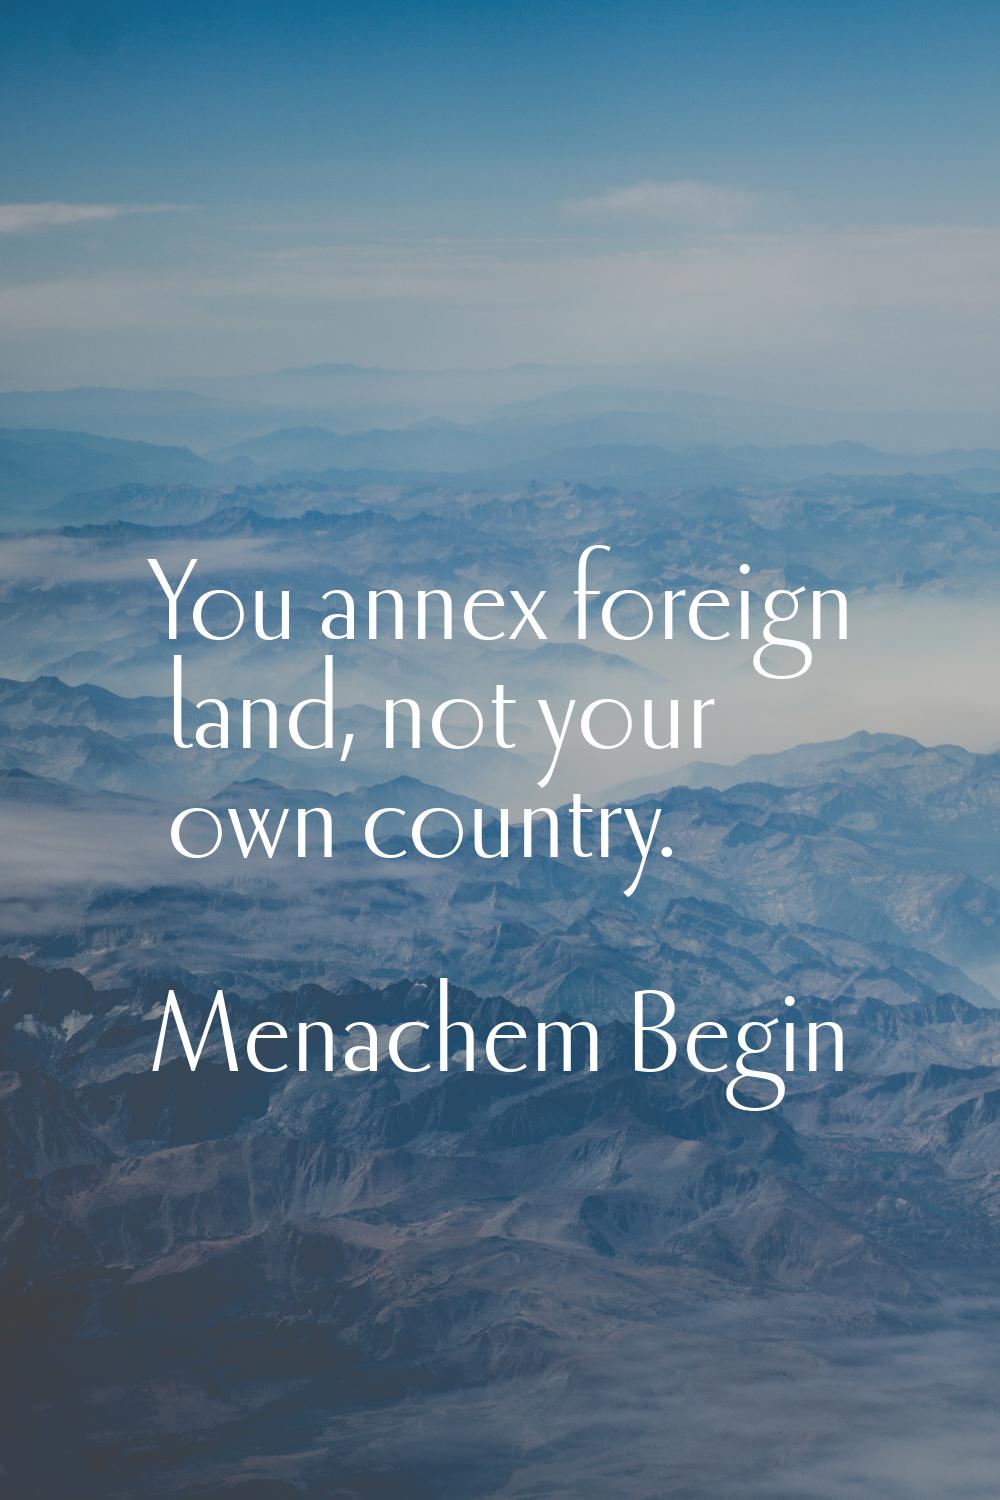 You annex foreign land, not your own country.